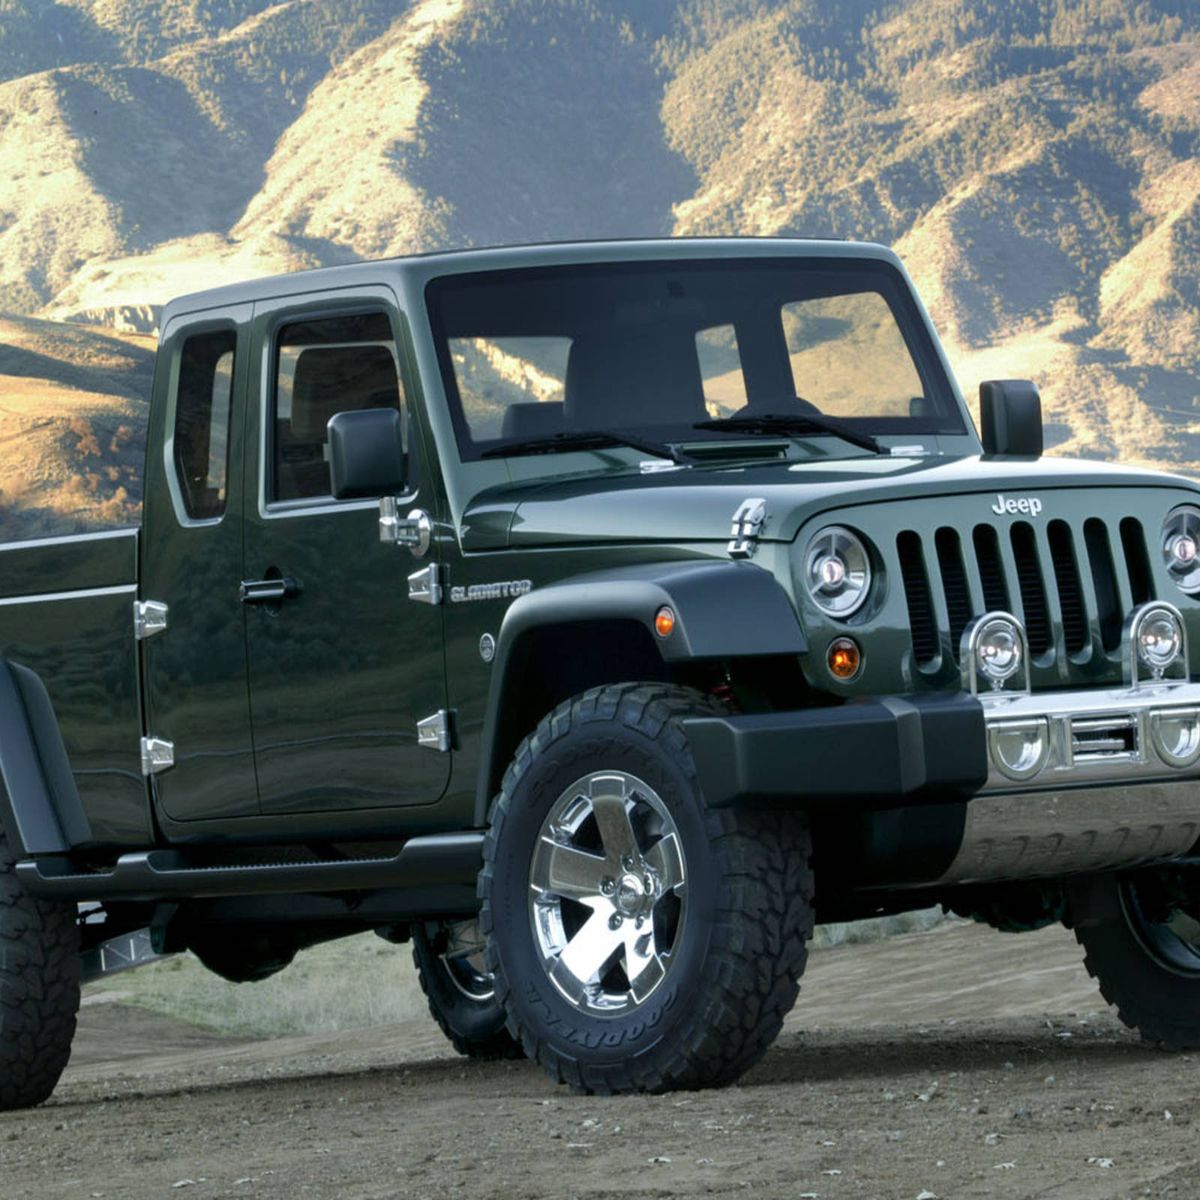 Will the upcoming Jeep Wrangler pickup be a Ram under the skin?